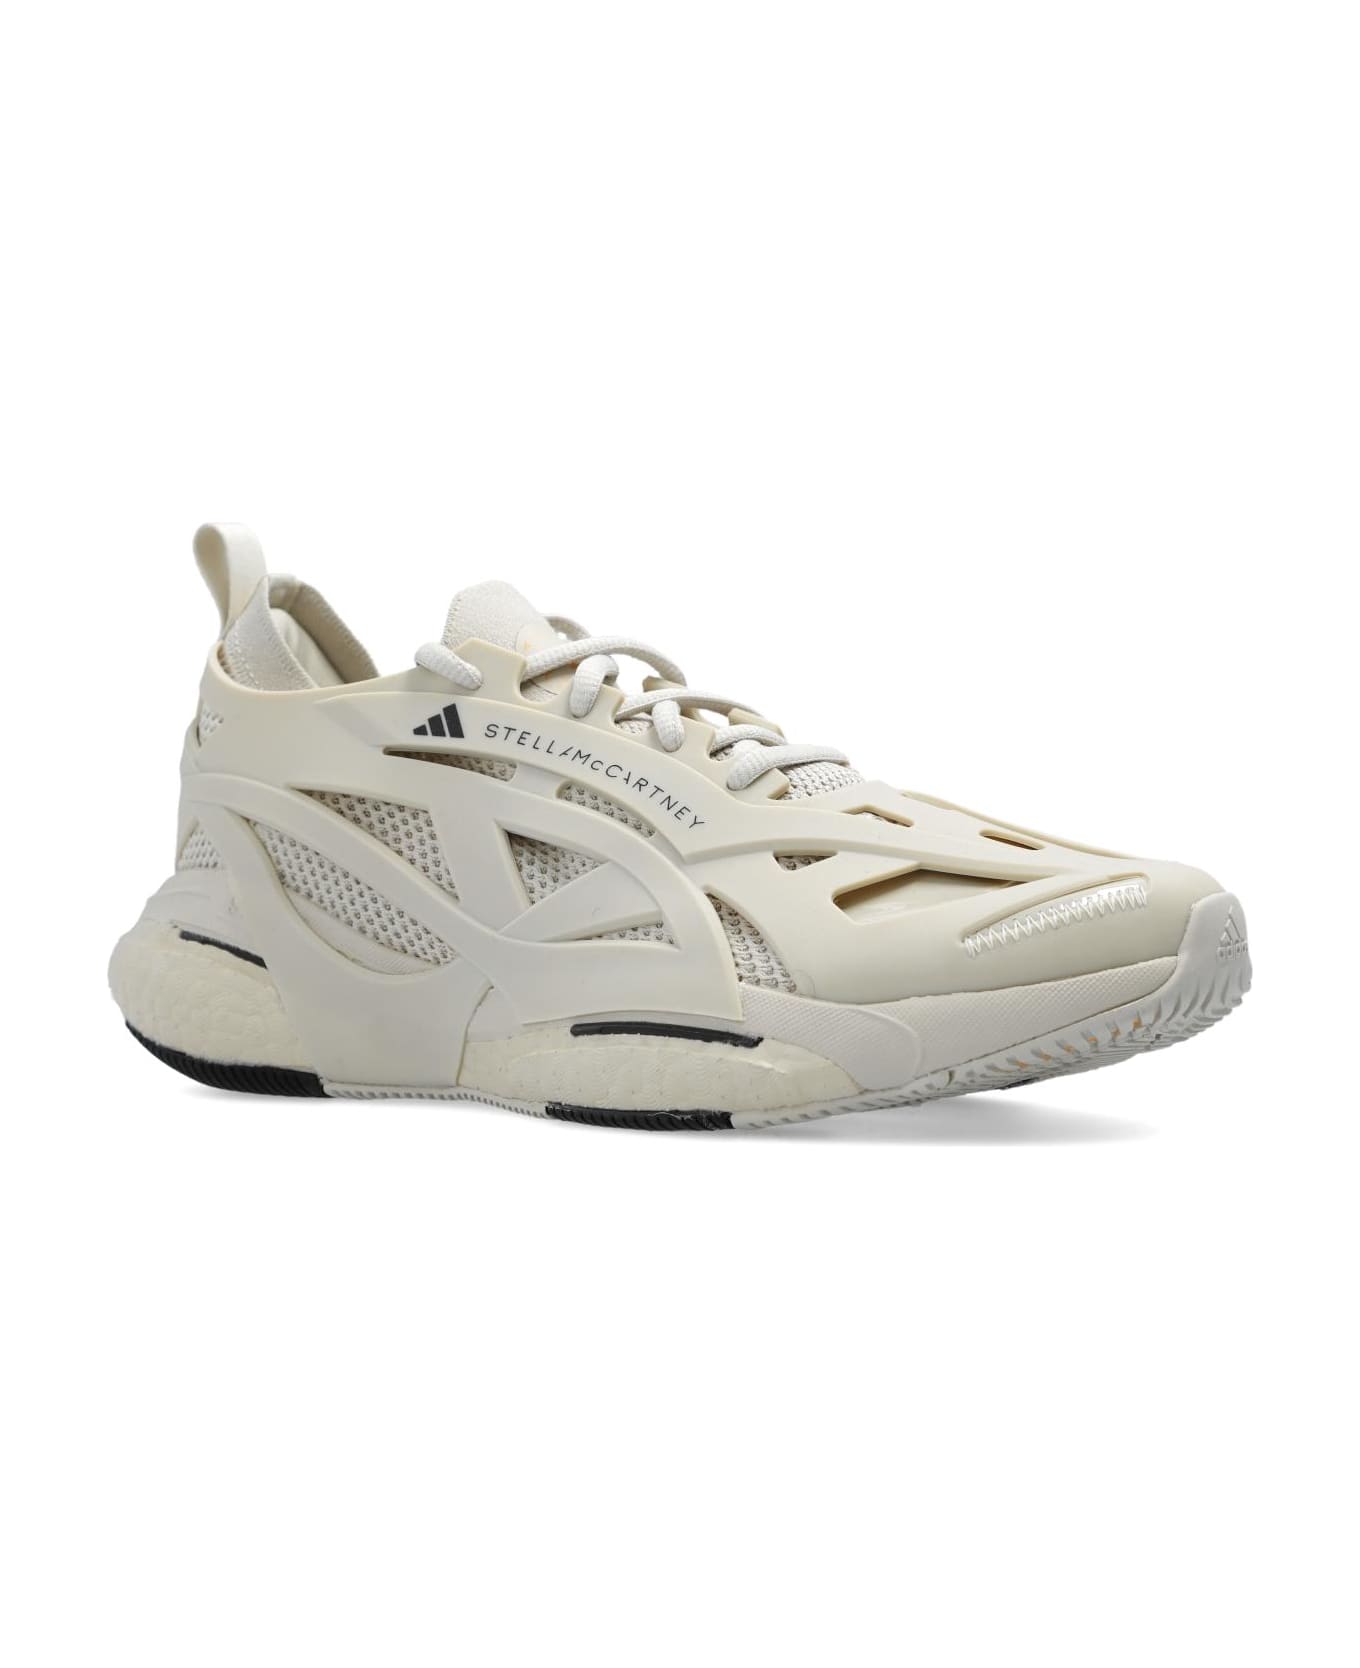 Adidas by Stella McCartney 'solarglide' Sneakers